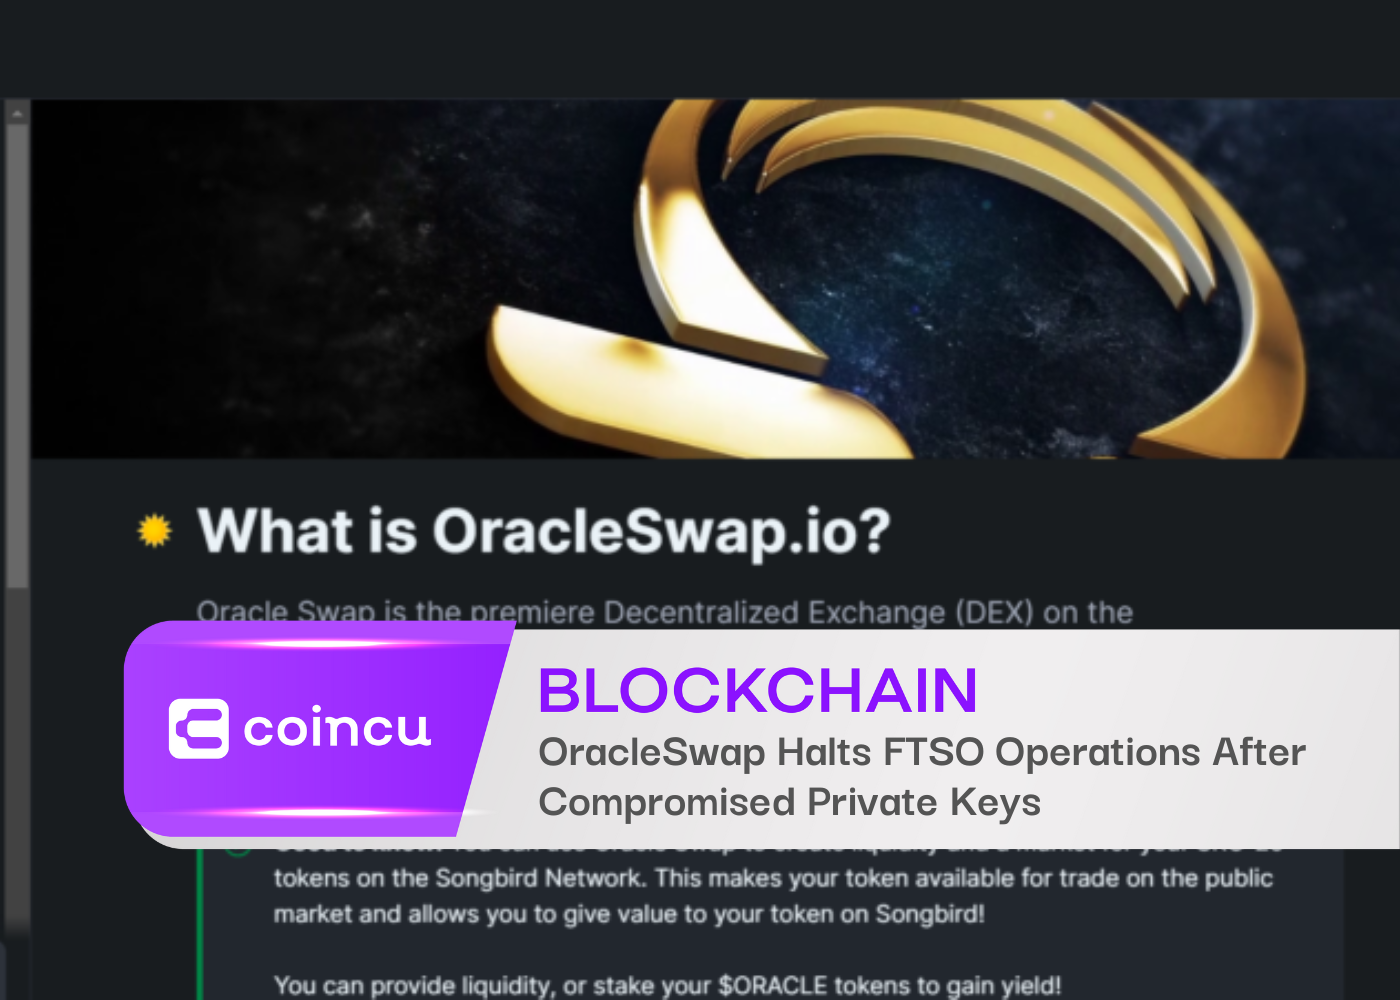 OracleSwap Halts FTSO Operations After